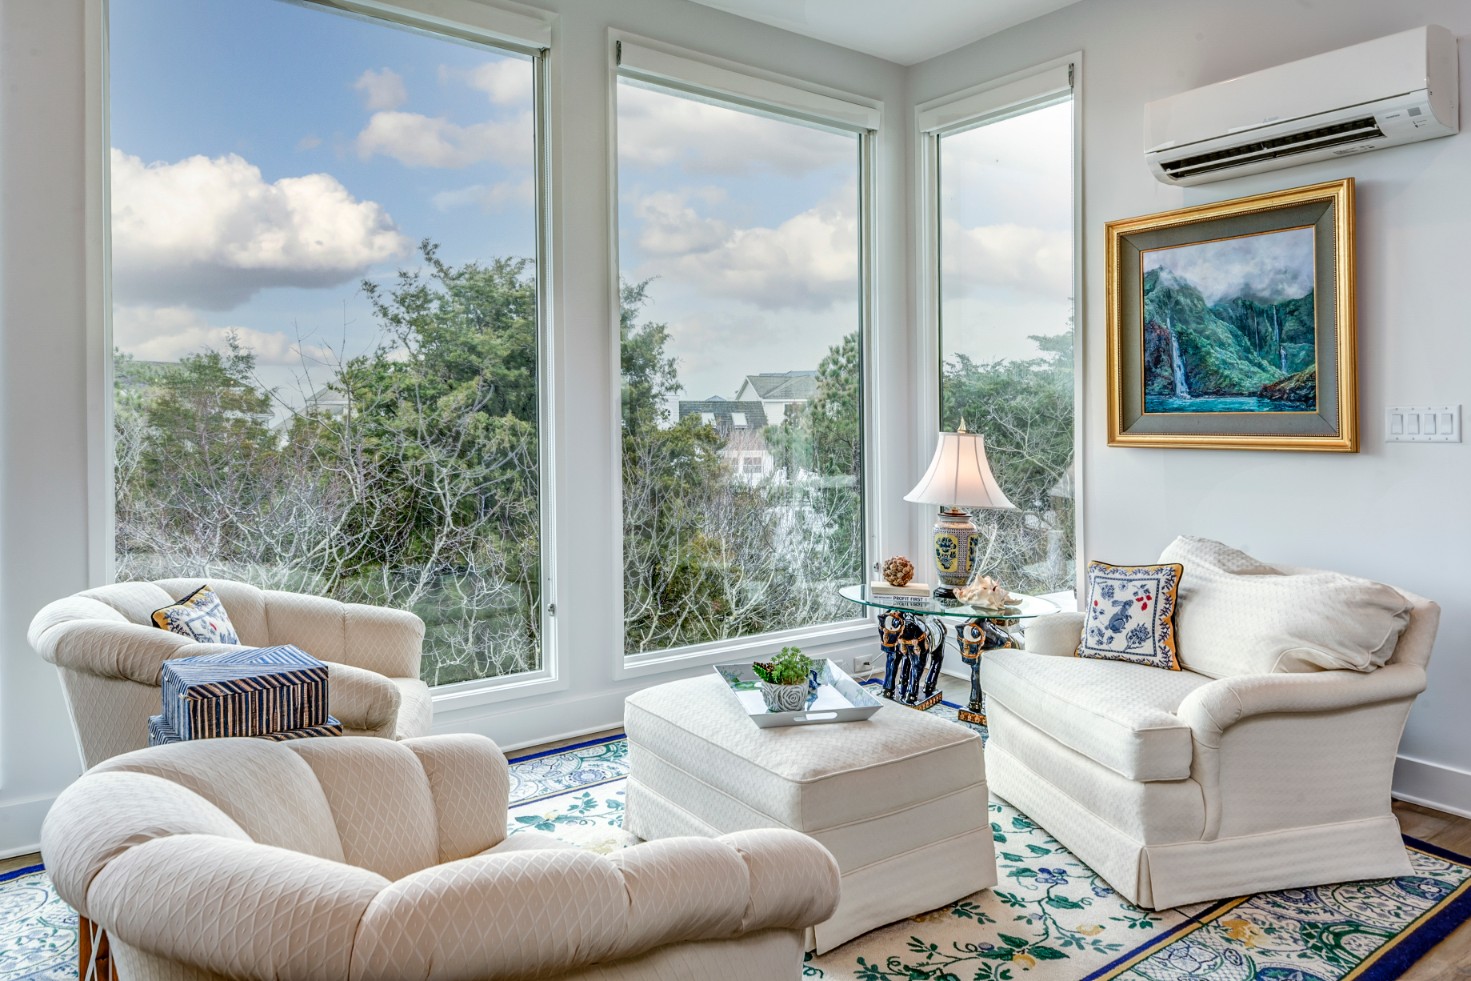 Cotton Patch Hills Renovation in Bethany Beach DE - Great Room with Soft Furniture and Large Windows